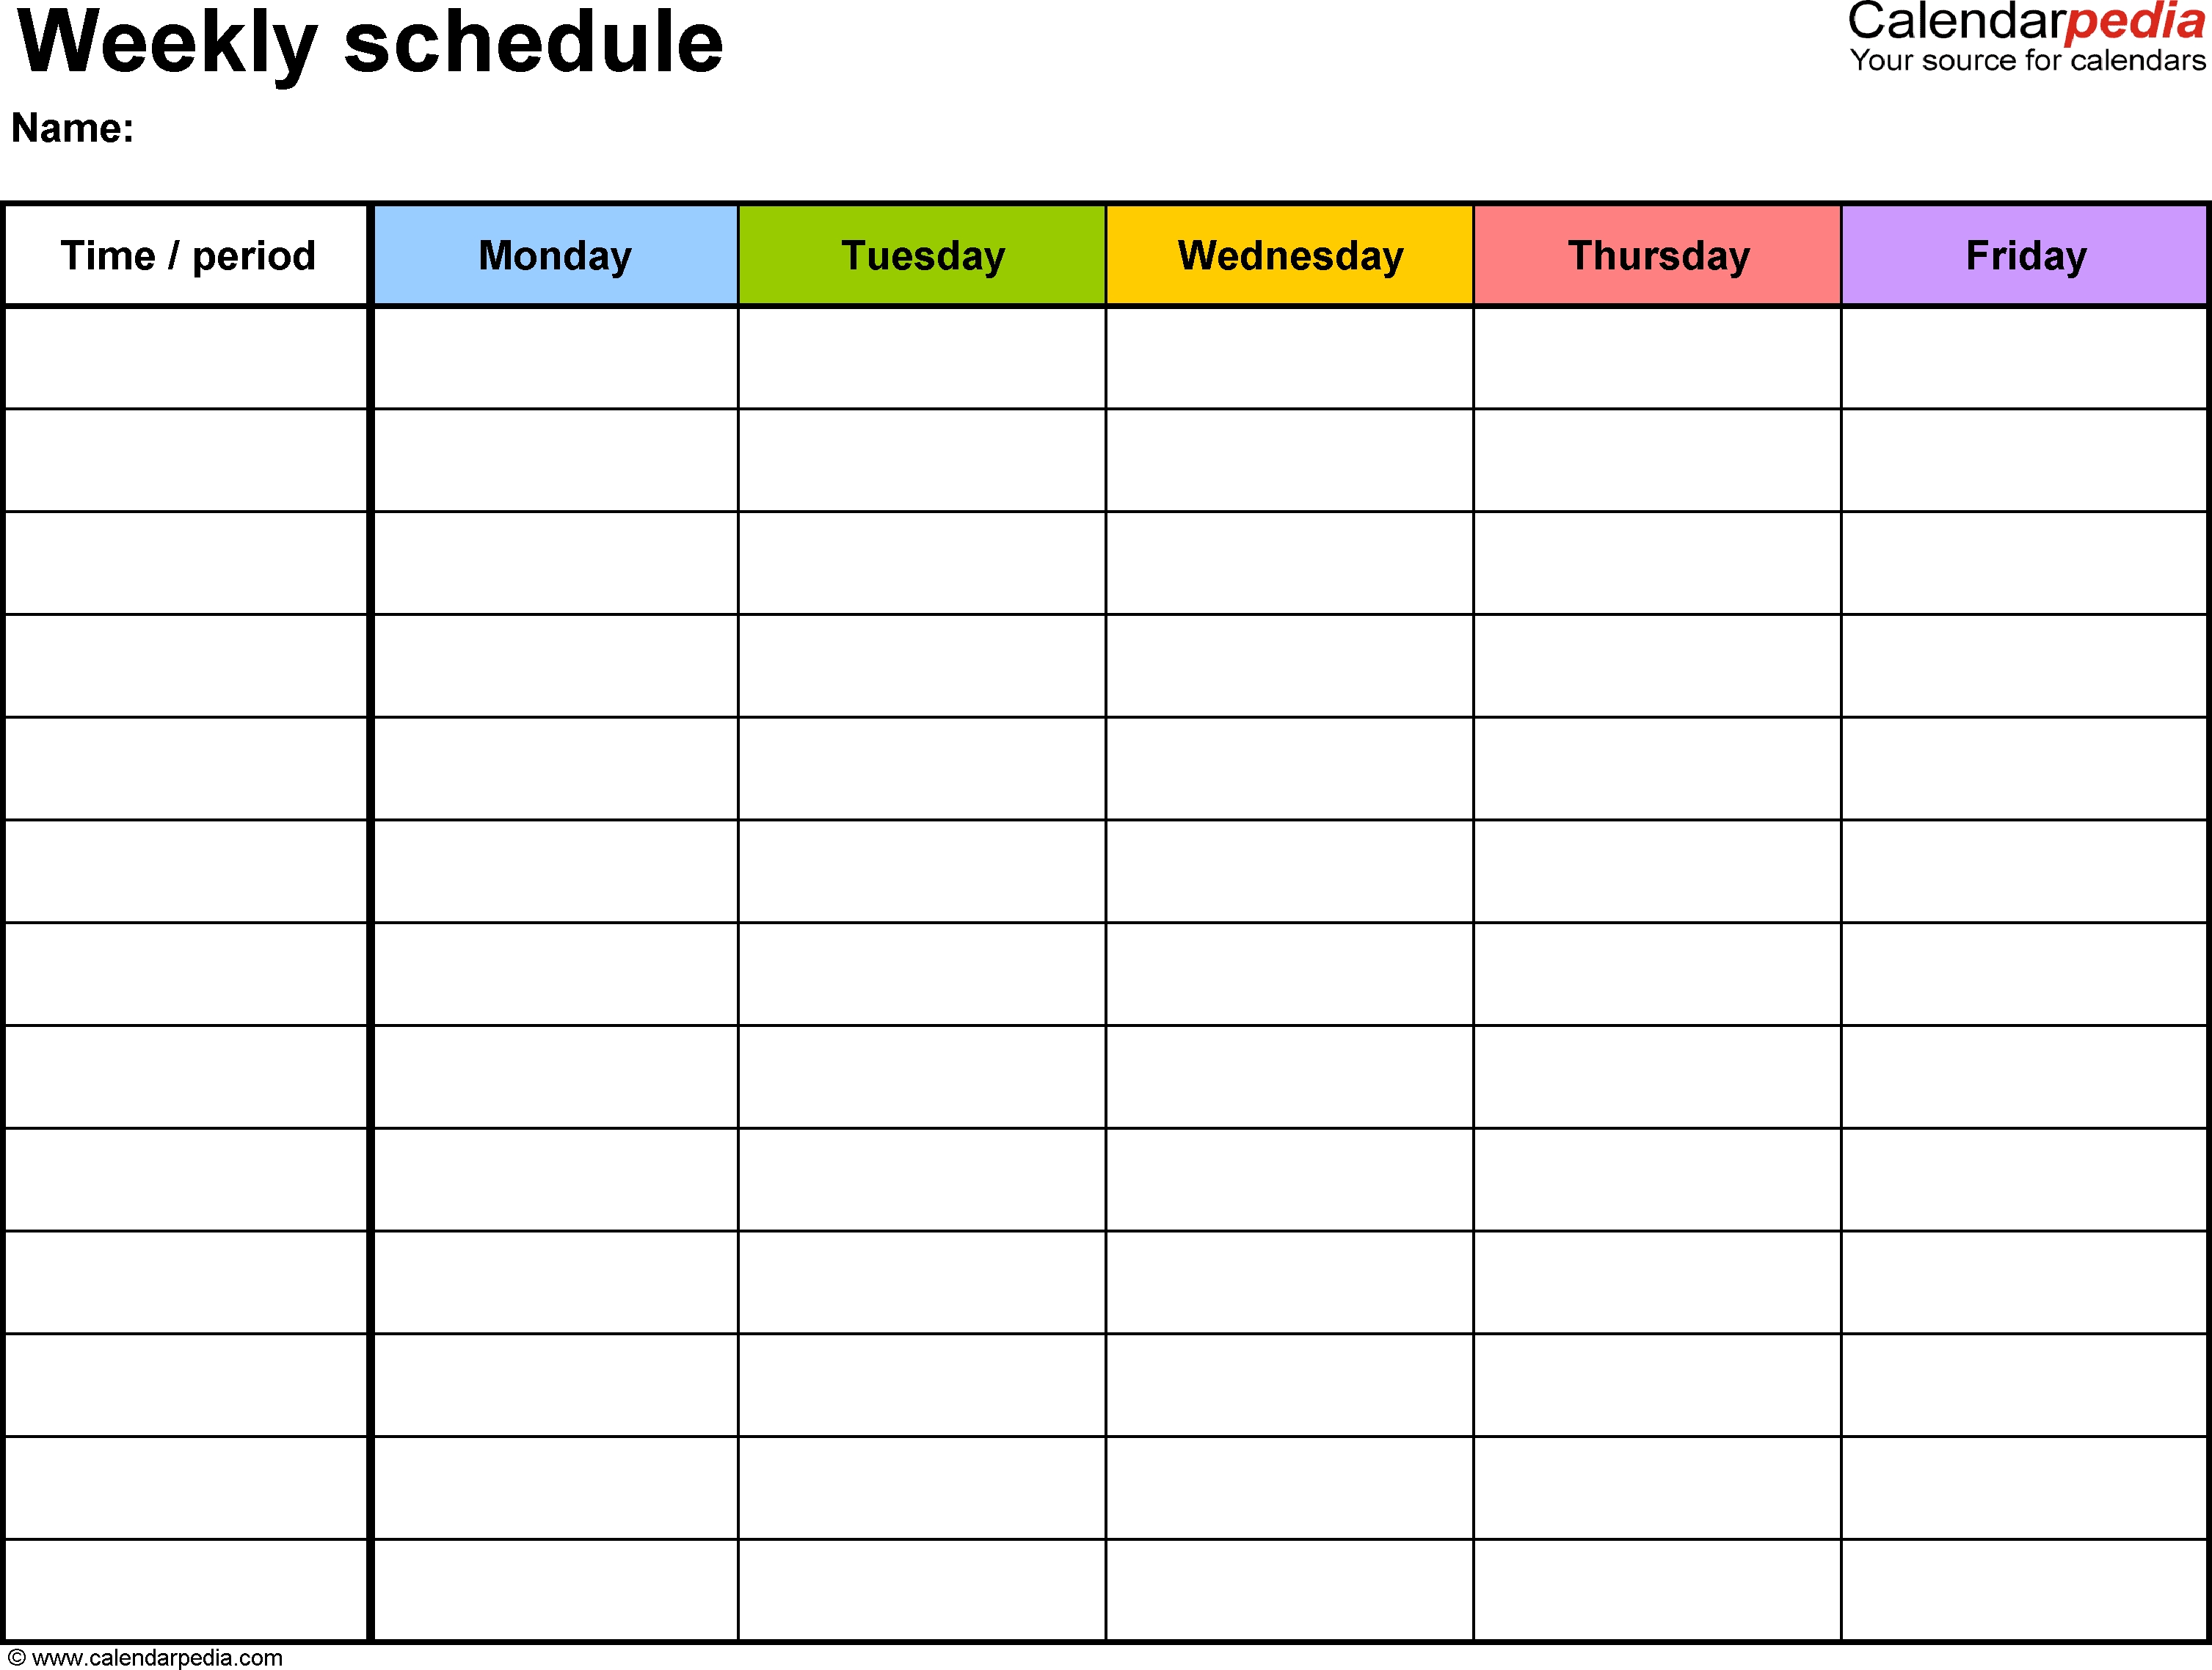 Free Weekly Schedule Templates For Excel - 18 Templates in To Do Calendar Template Free